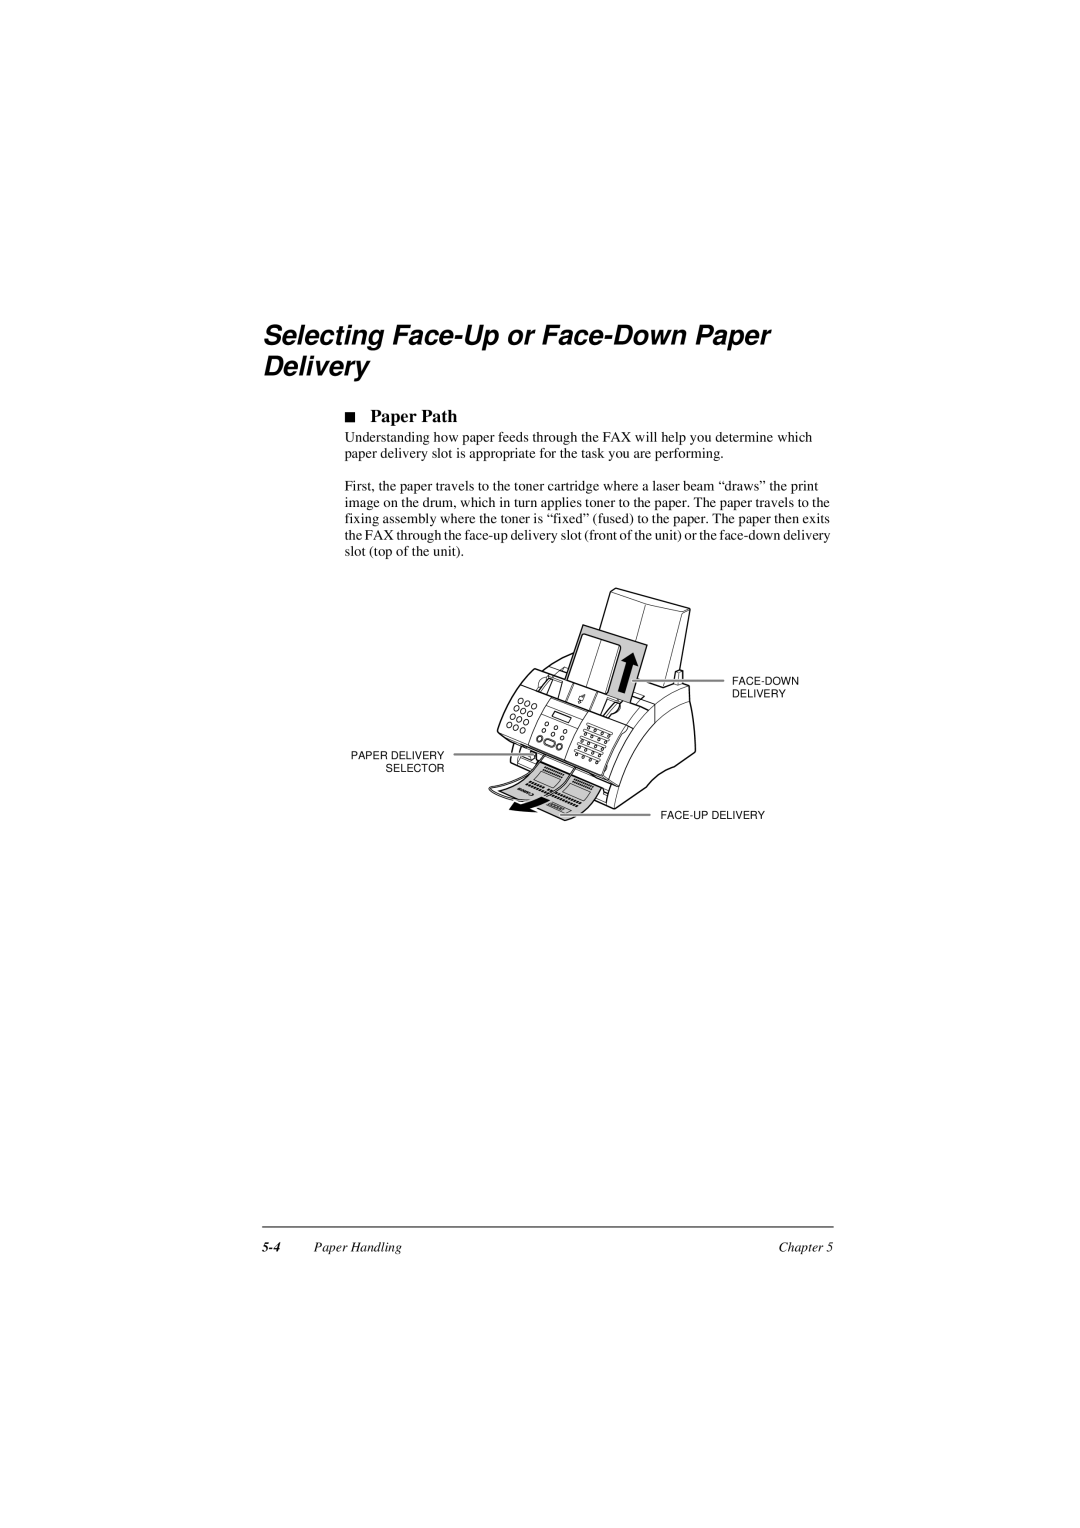 Canon L290, L240 manual Selecting Face-Up or Face-Down Paper Delivery, Paper Path 